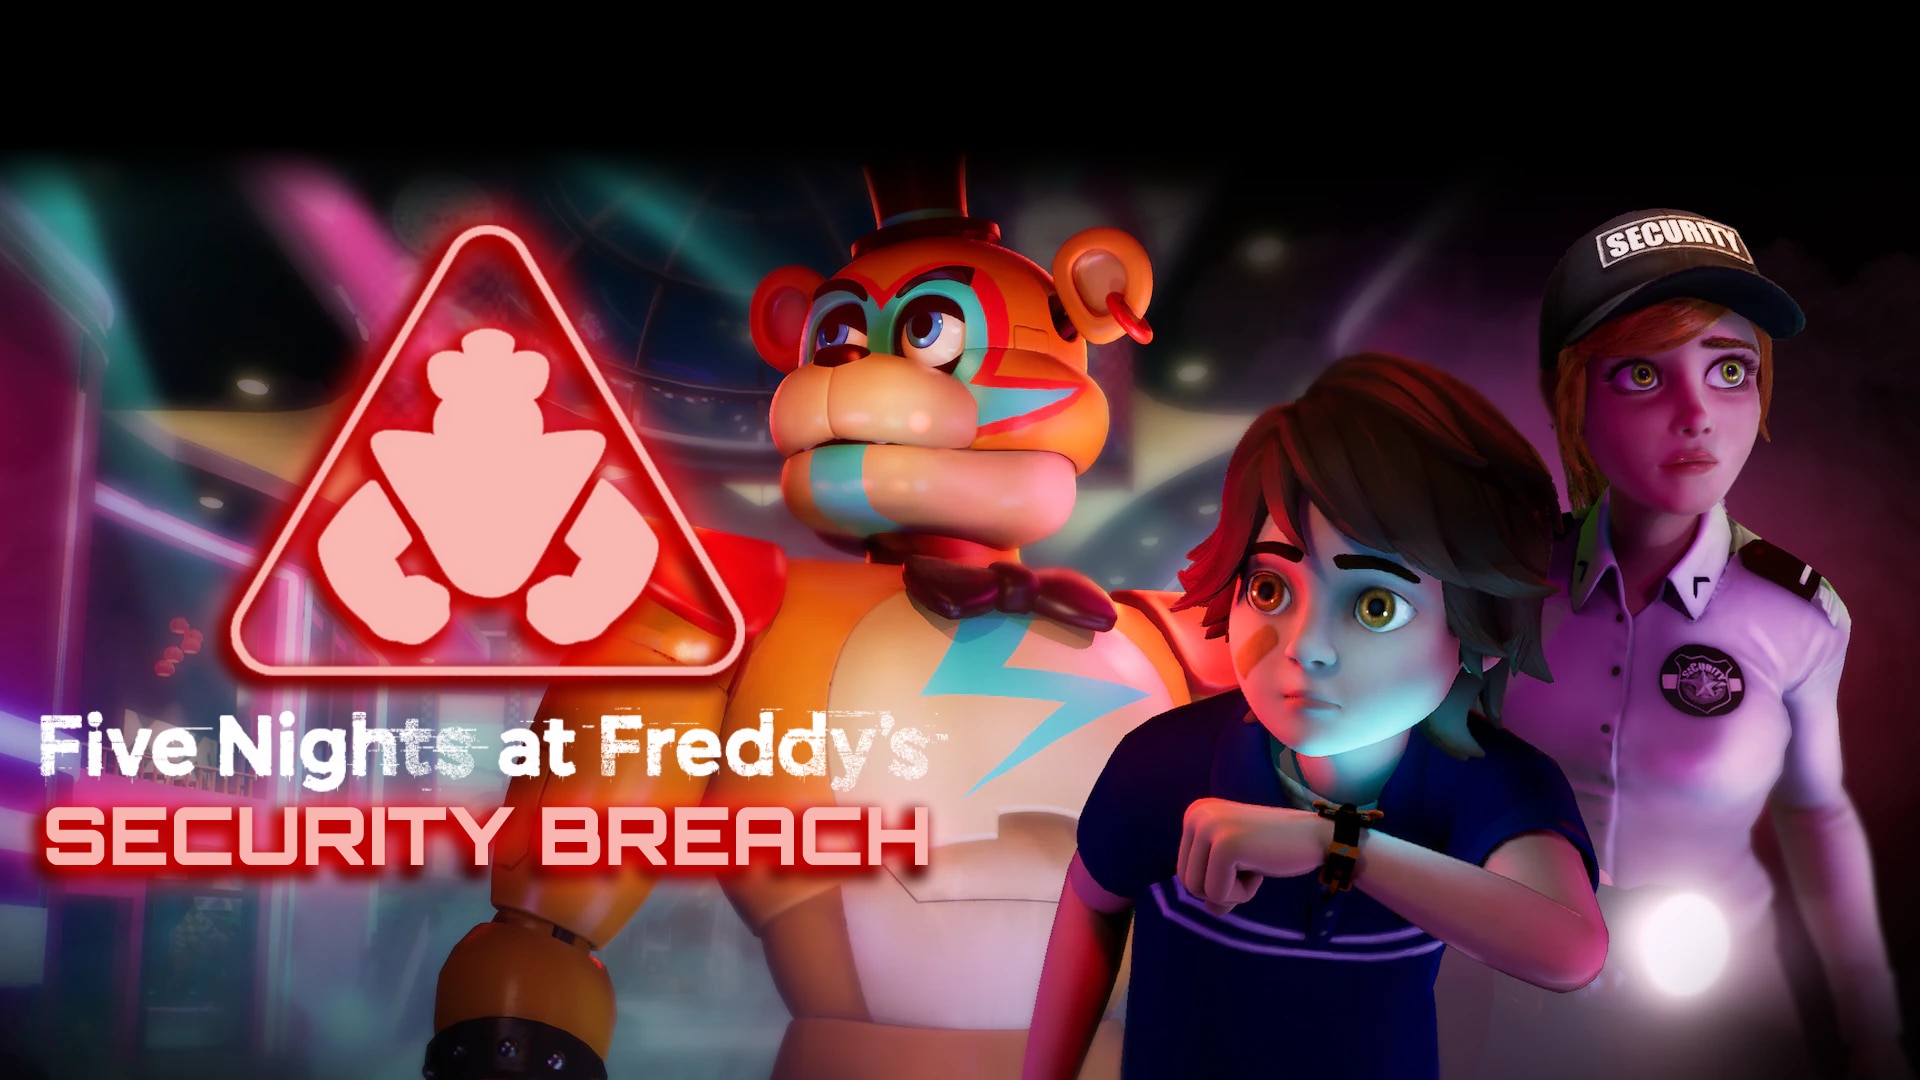 Buy Five Nights at Freddy's: Security Breach (PC) - Steam Account